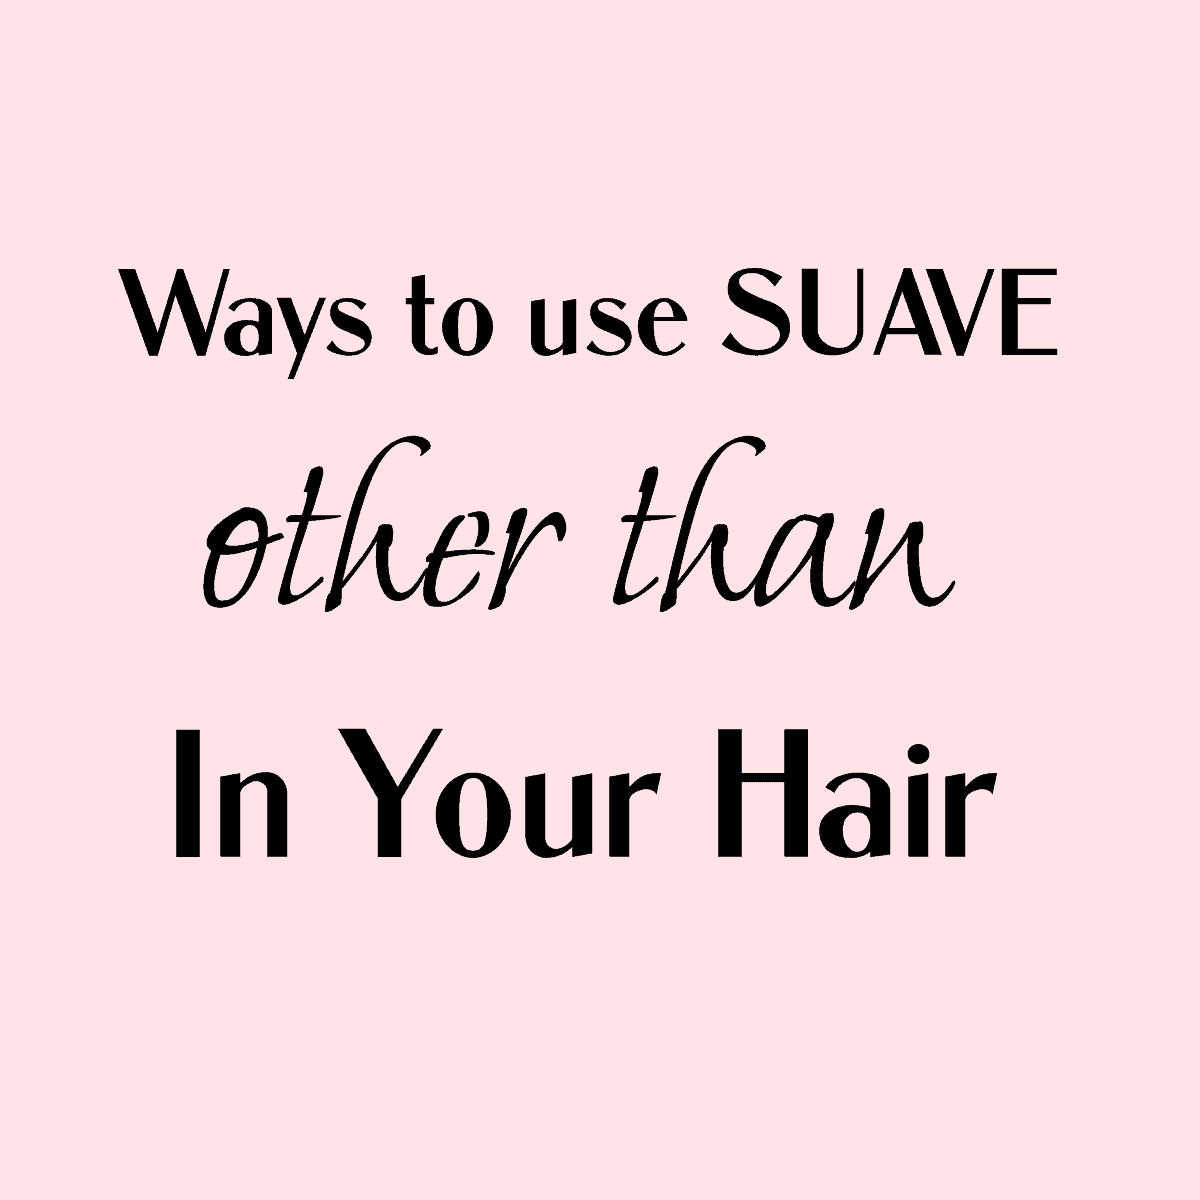 Ways To Use Suave Other Than In Your Hair